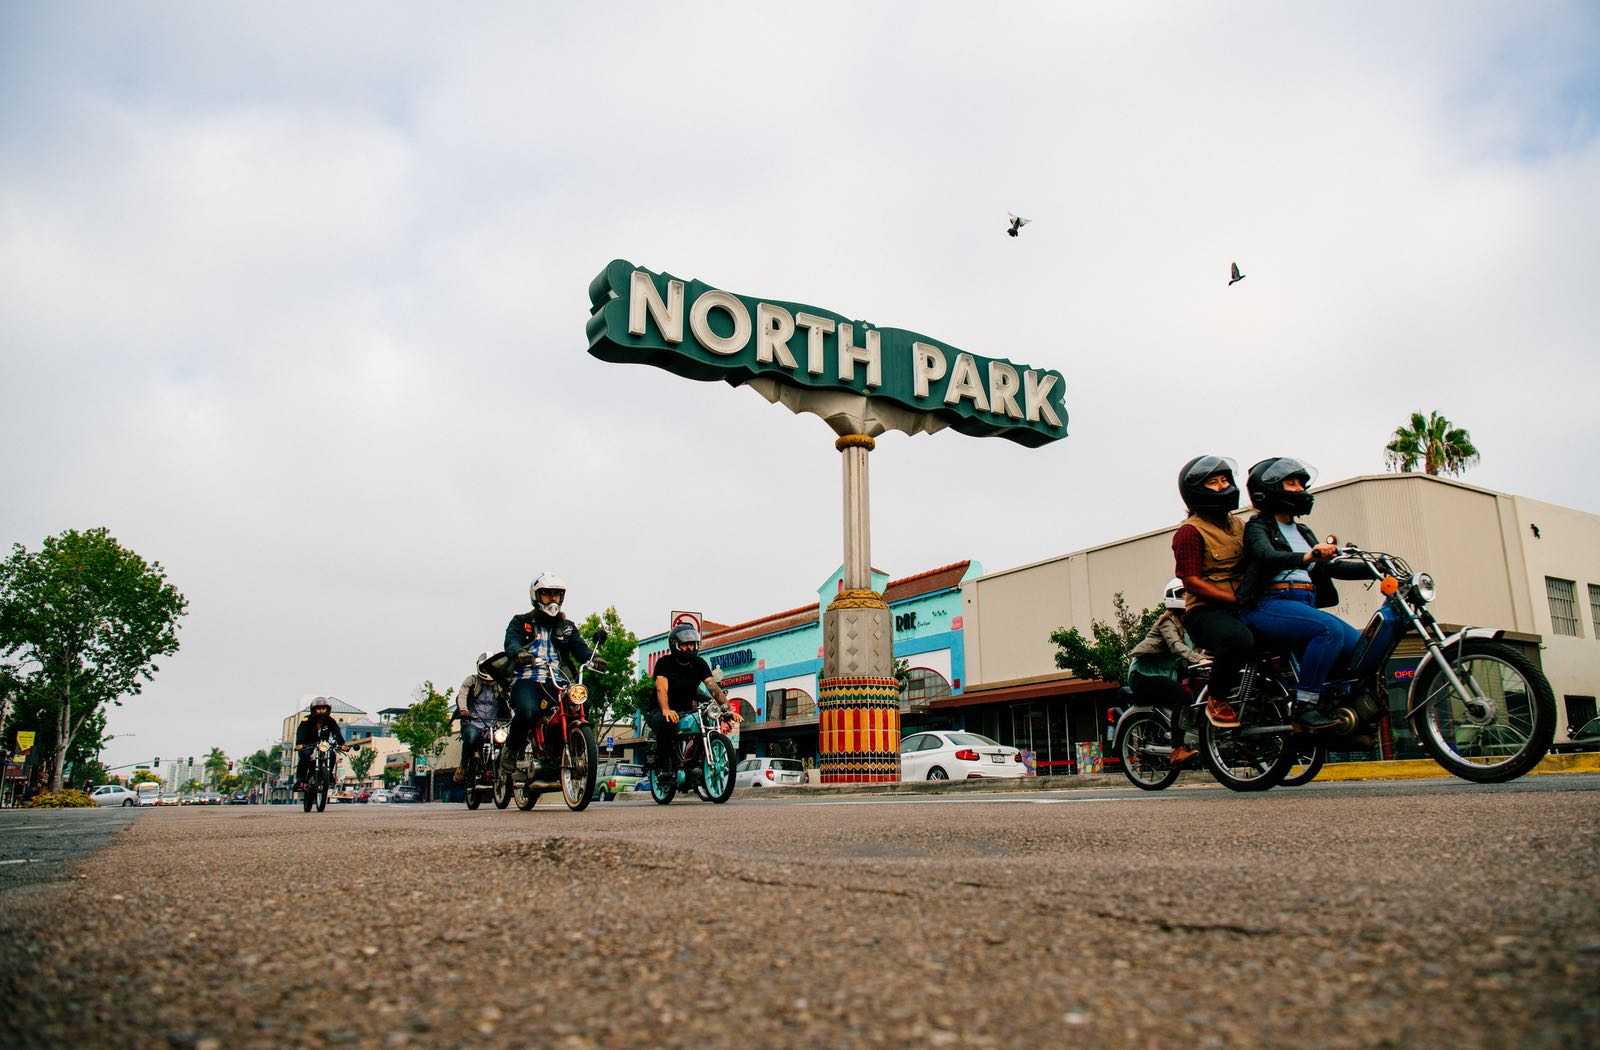 Moped riding past the North Park sign - Top Things to Do in San Diego